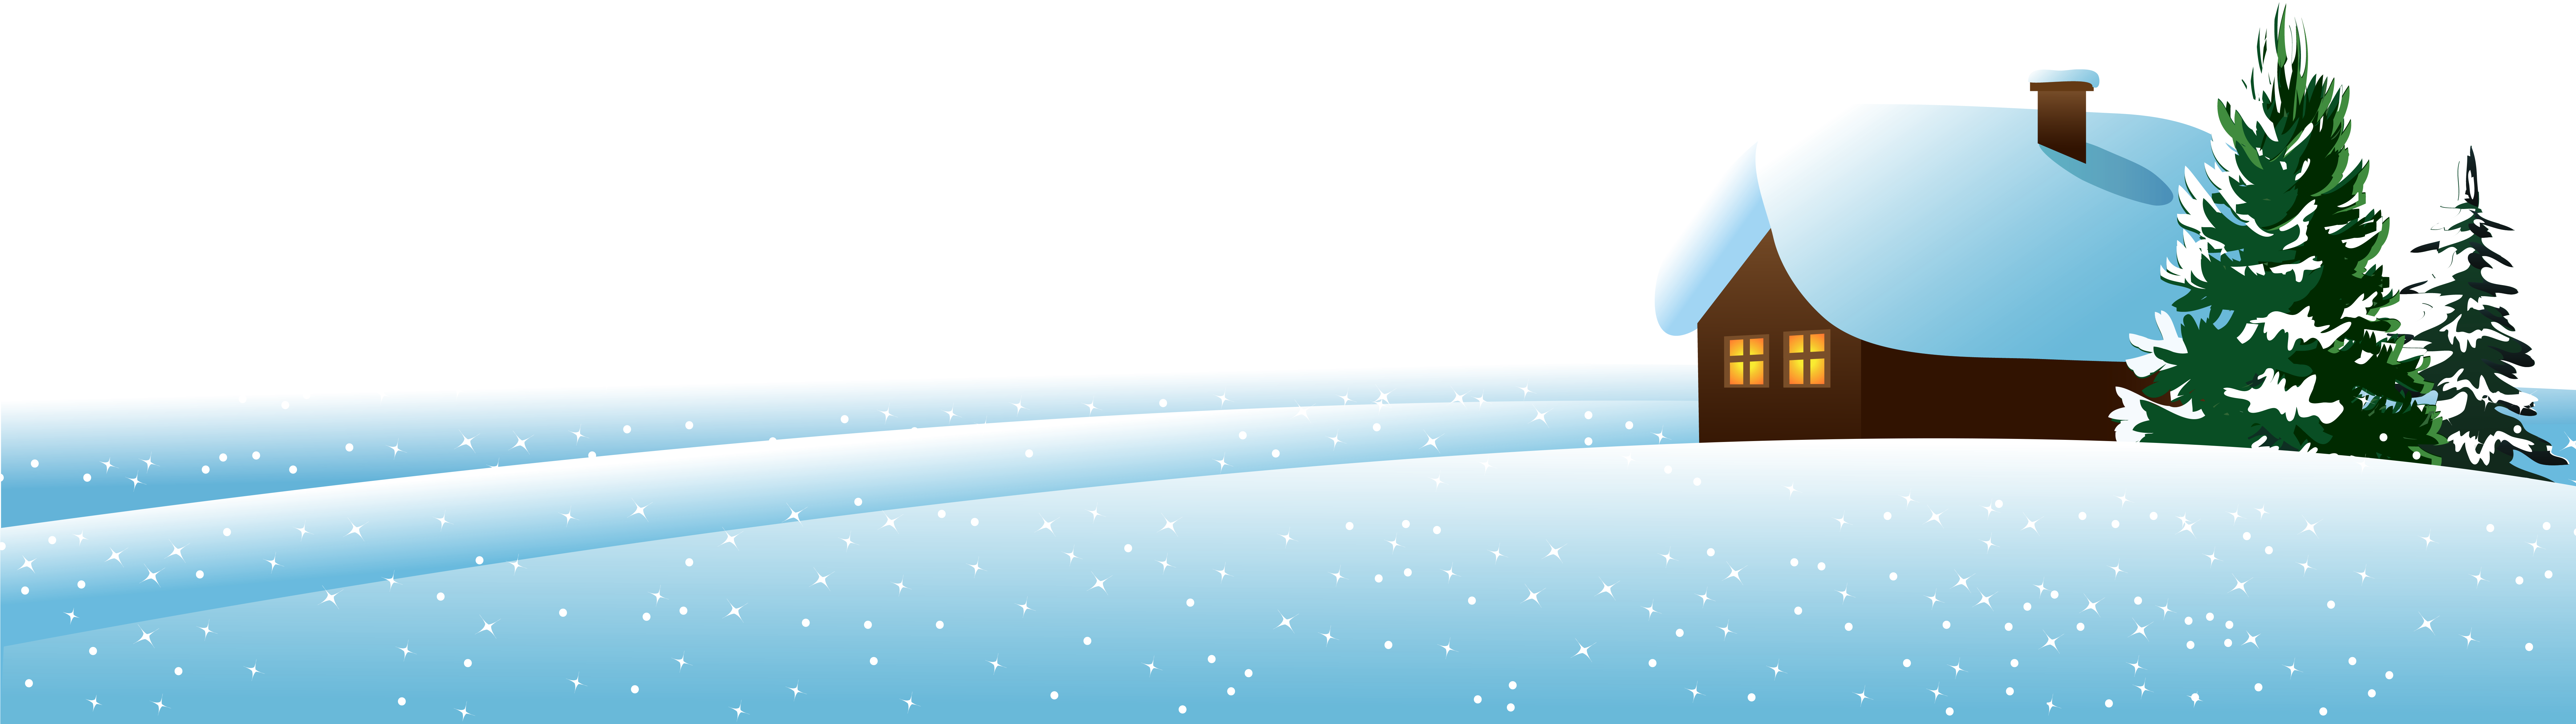 Winter Png Transparent Image Download Size 8363x2349px